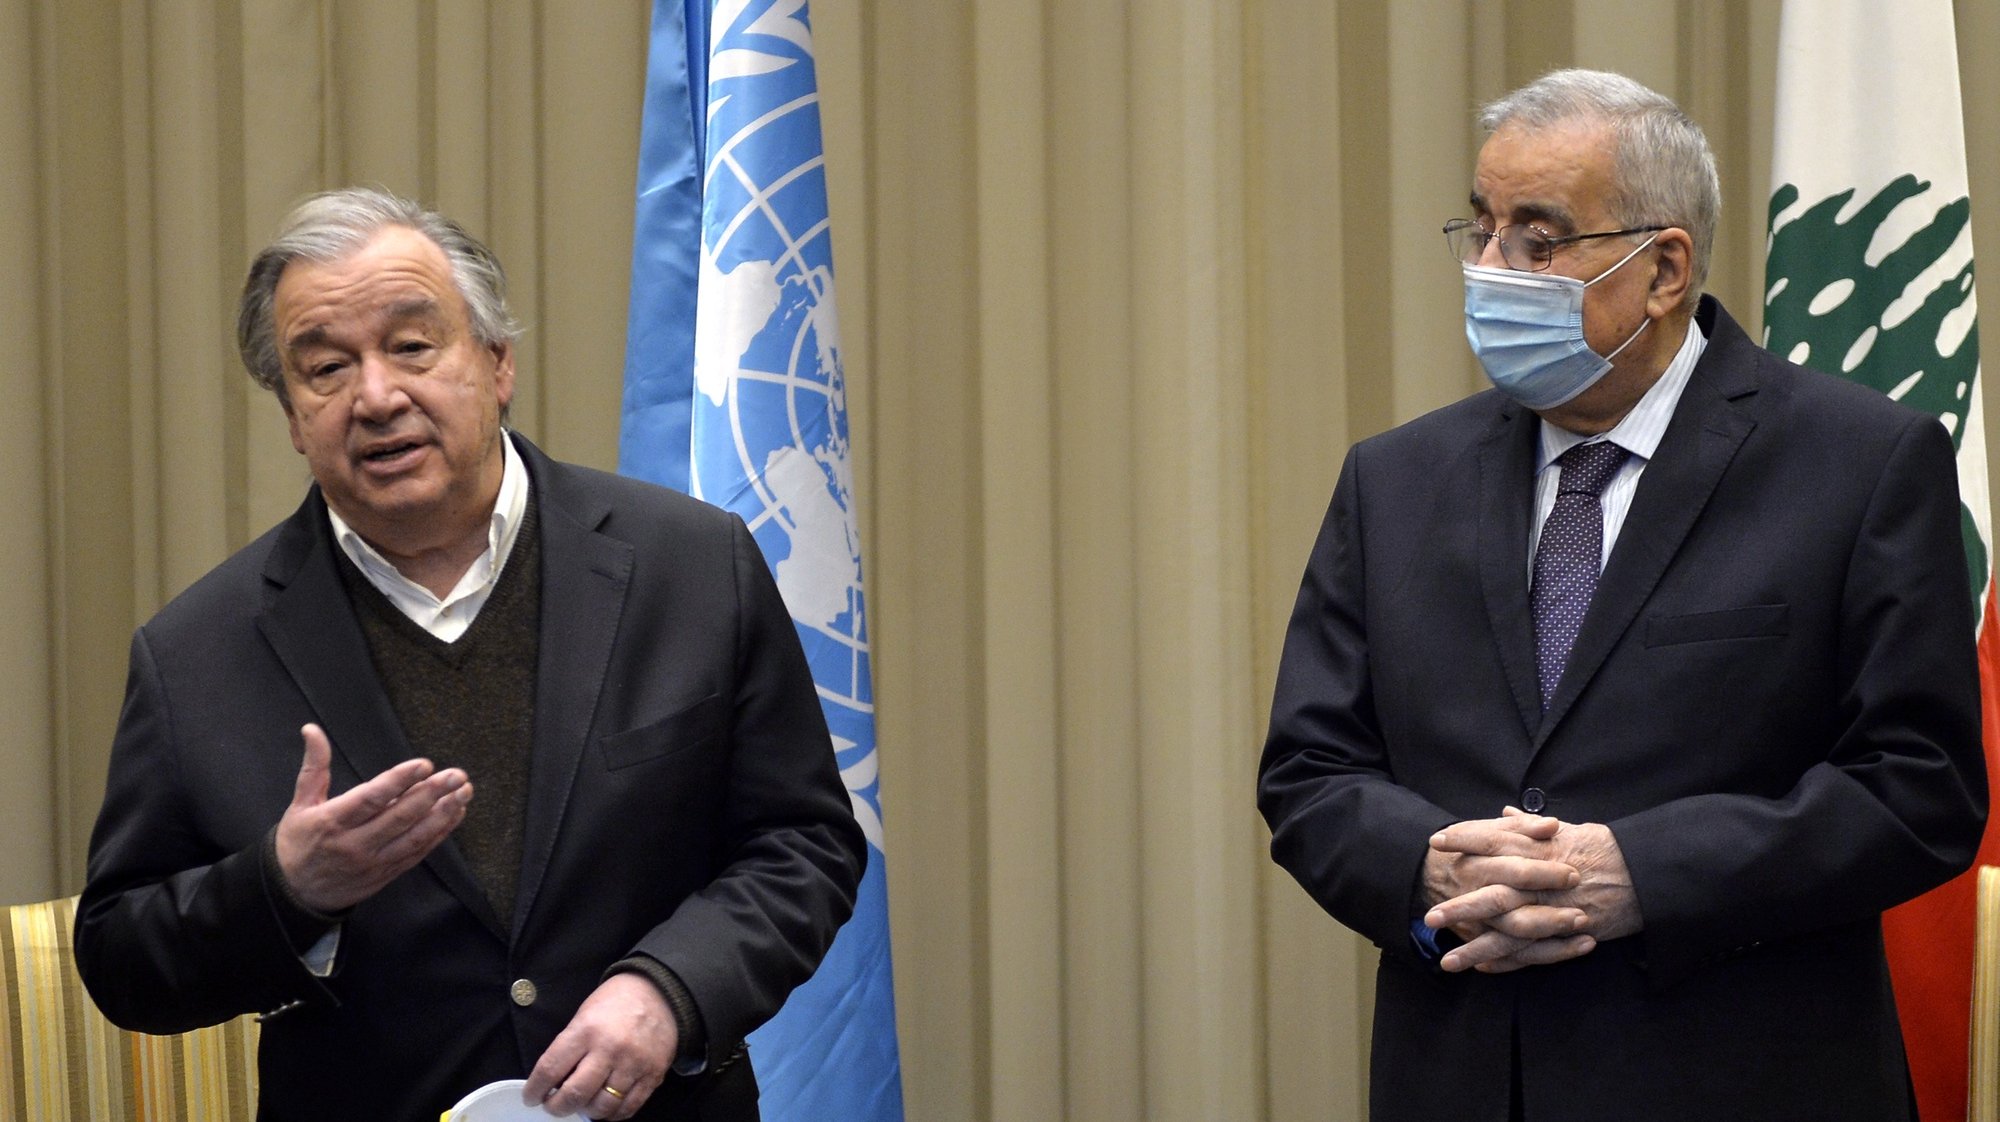 epa09649834 Lebanese Foreign Minister Abdallah Bou Habib (R) listens to Antonio Guterres (L), Secretary-General of the United Nations as he speaks to the media upon his arrival at the Rafik Hariri international airport in Beirut, Lebanon, 19 December 2021. Guterres visit Lebanon for four days to meet with Government officials, including President Michel Aoun, Speaker Nabih Berri, and Prime Minister Najib Mikati, as well as a number of religious leaders and civil society representatives and he will visit the UN Interim Force in Lebanon and tour parts of the Blue Line.  EPA/WAEL HAMZEH